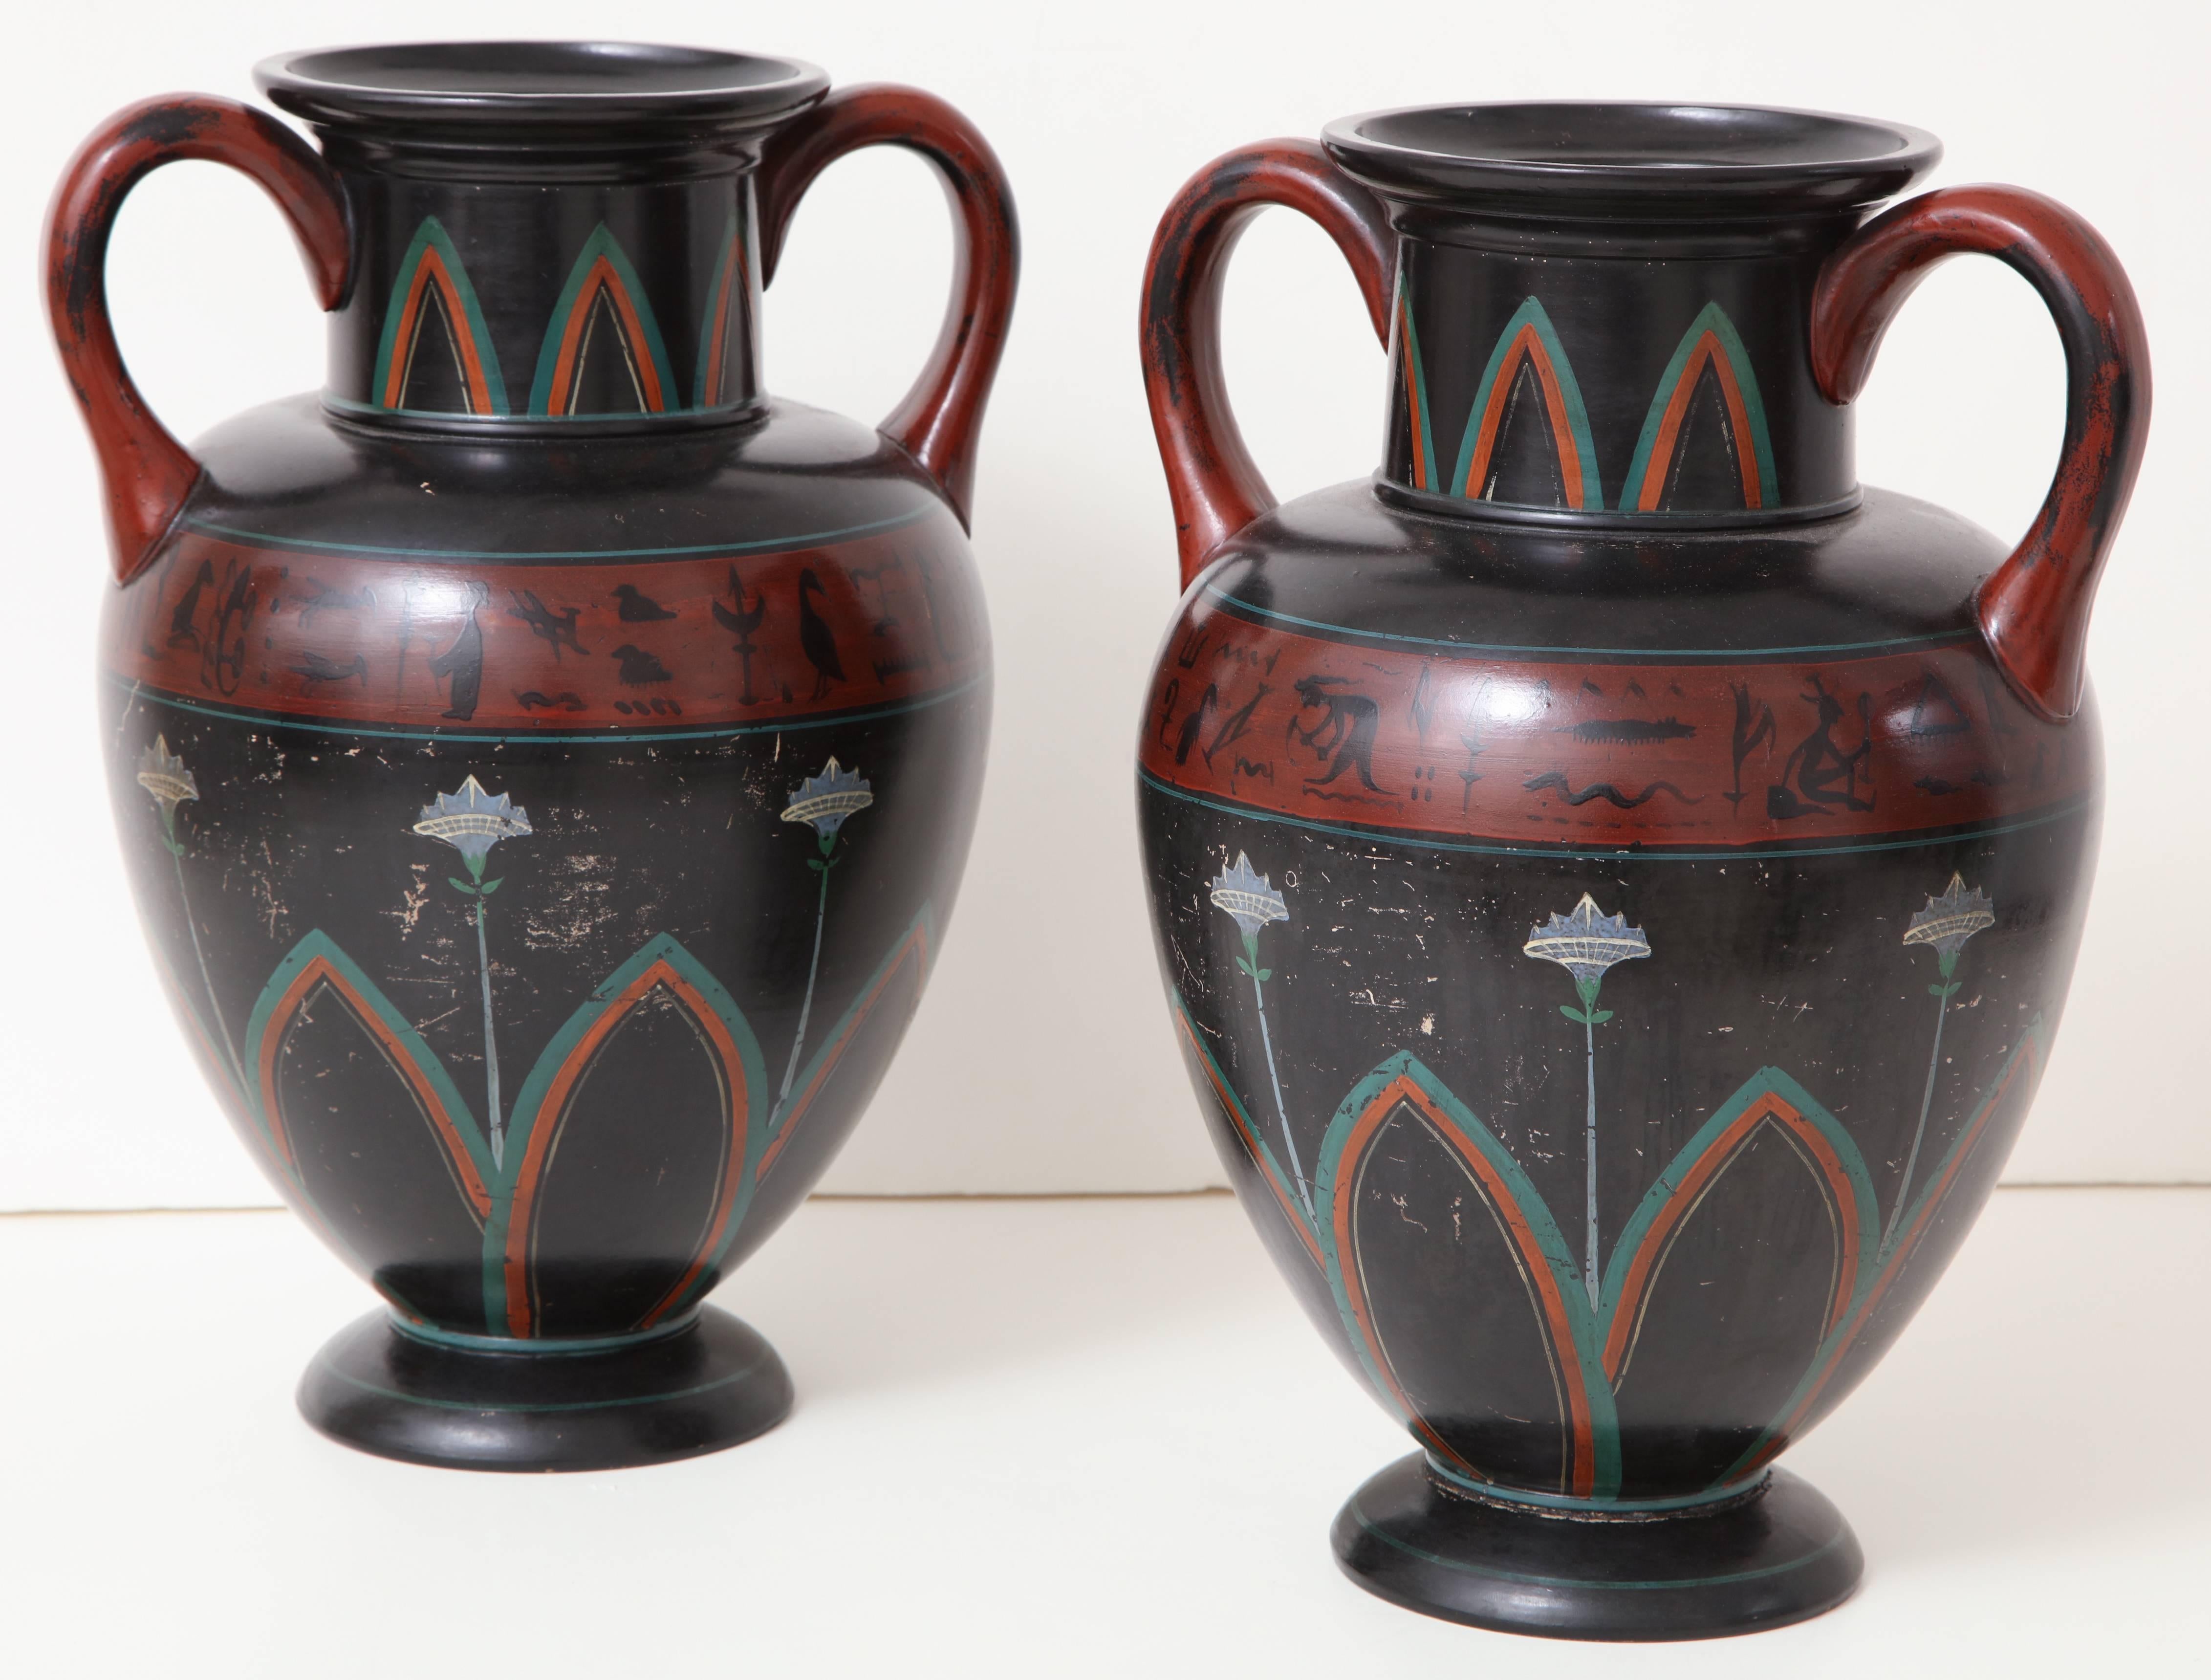 A pair of mid-19th century German Neoclassical polychrome painted terracotta vases by Ferdinand Gerbing